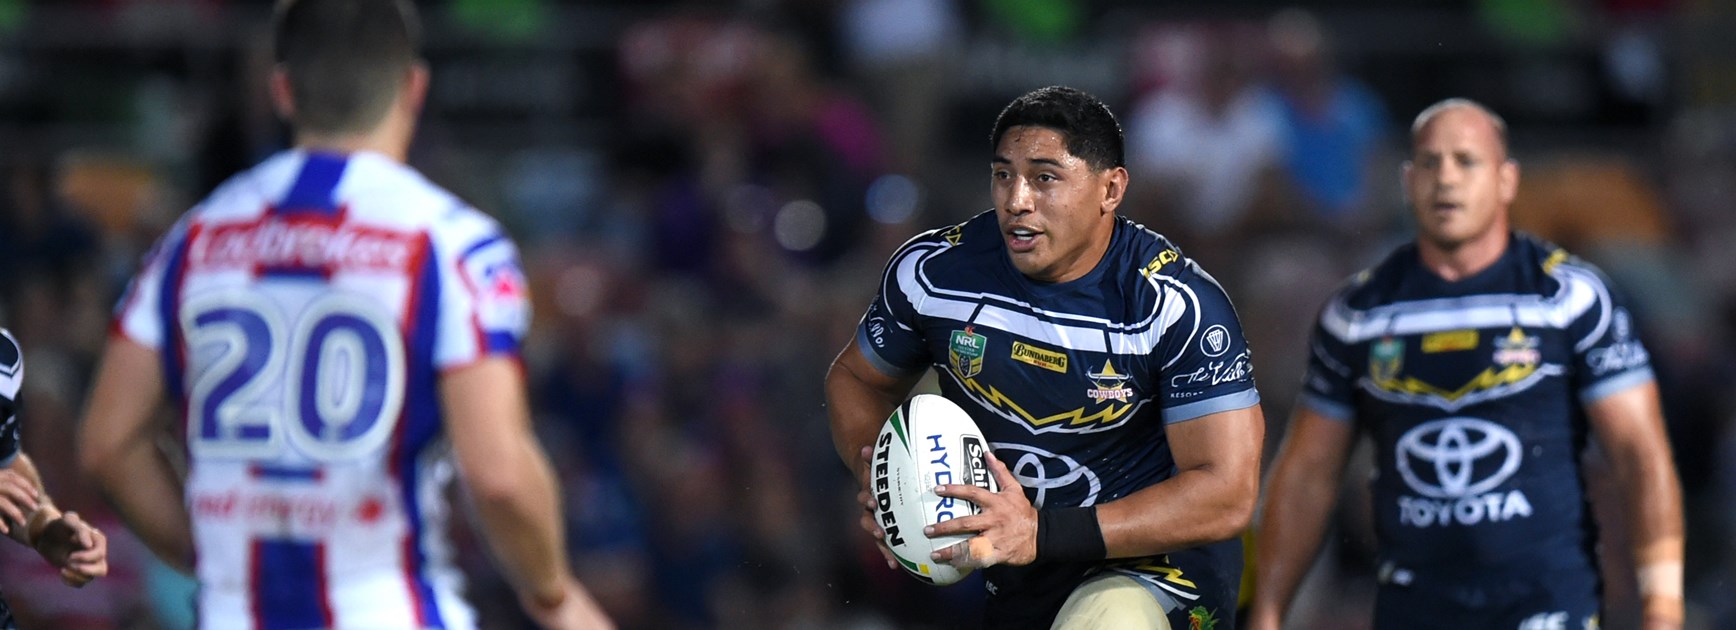 Taumalolo and Thurston earn ultimate praise from peers